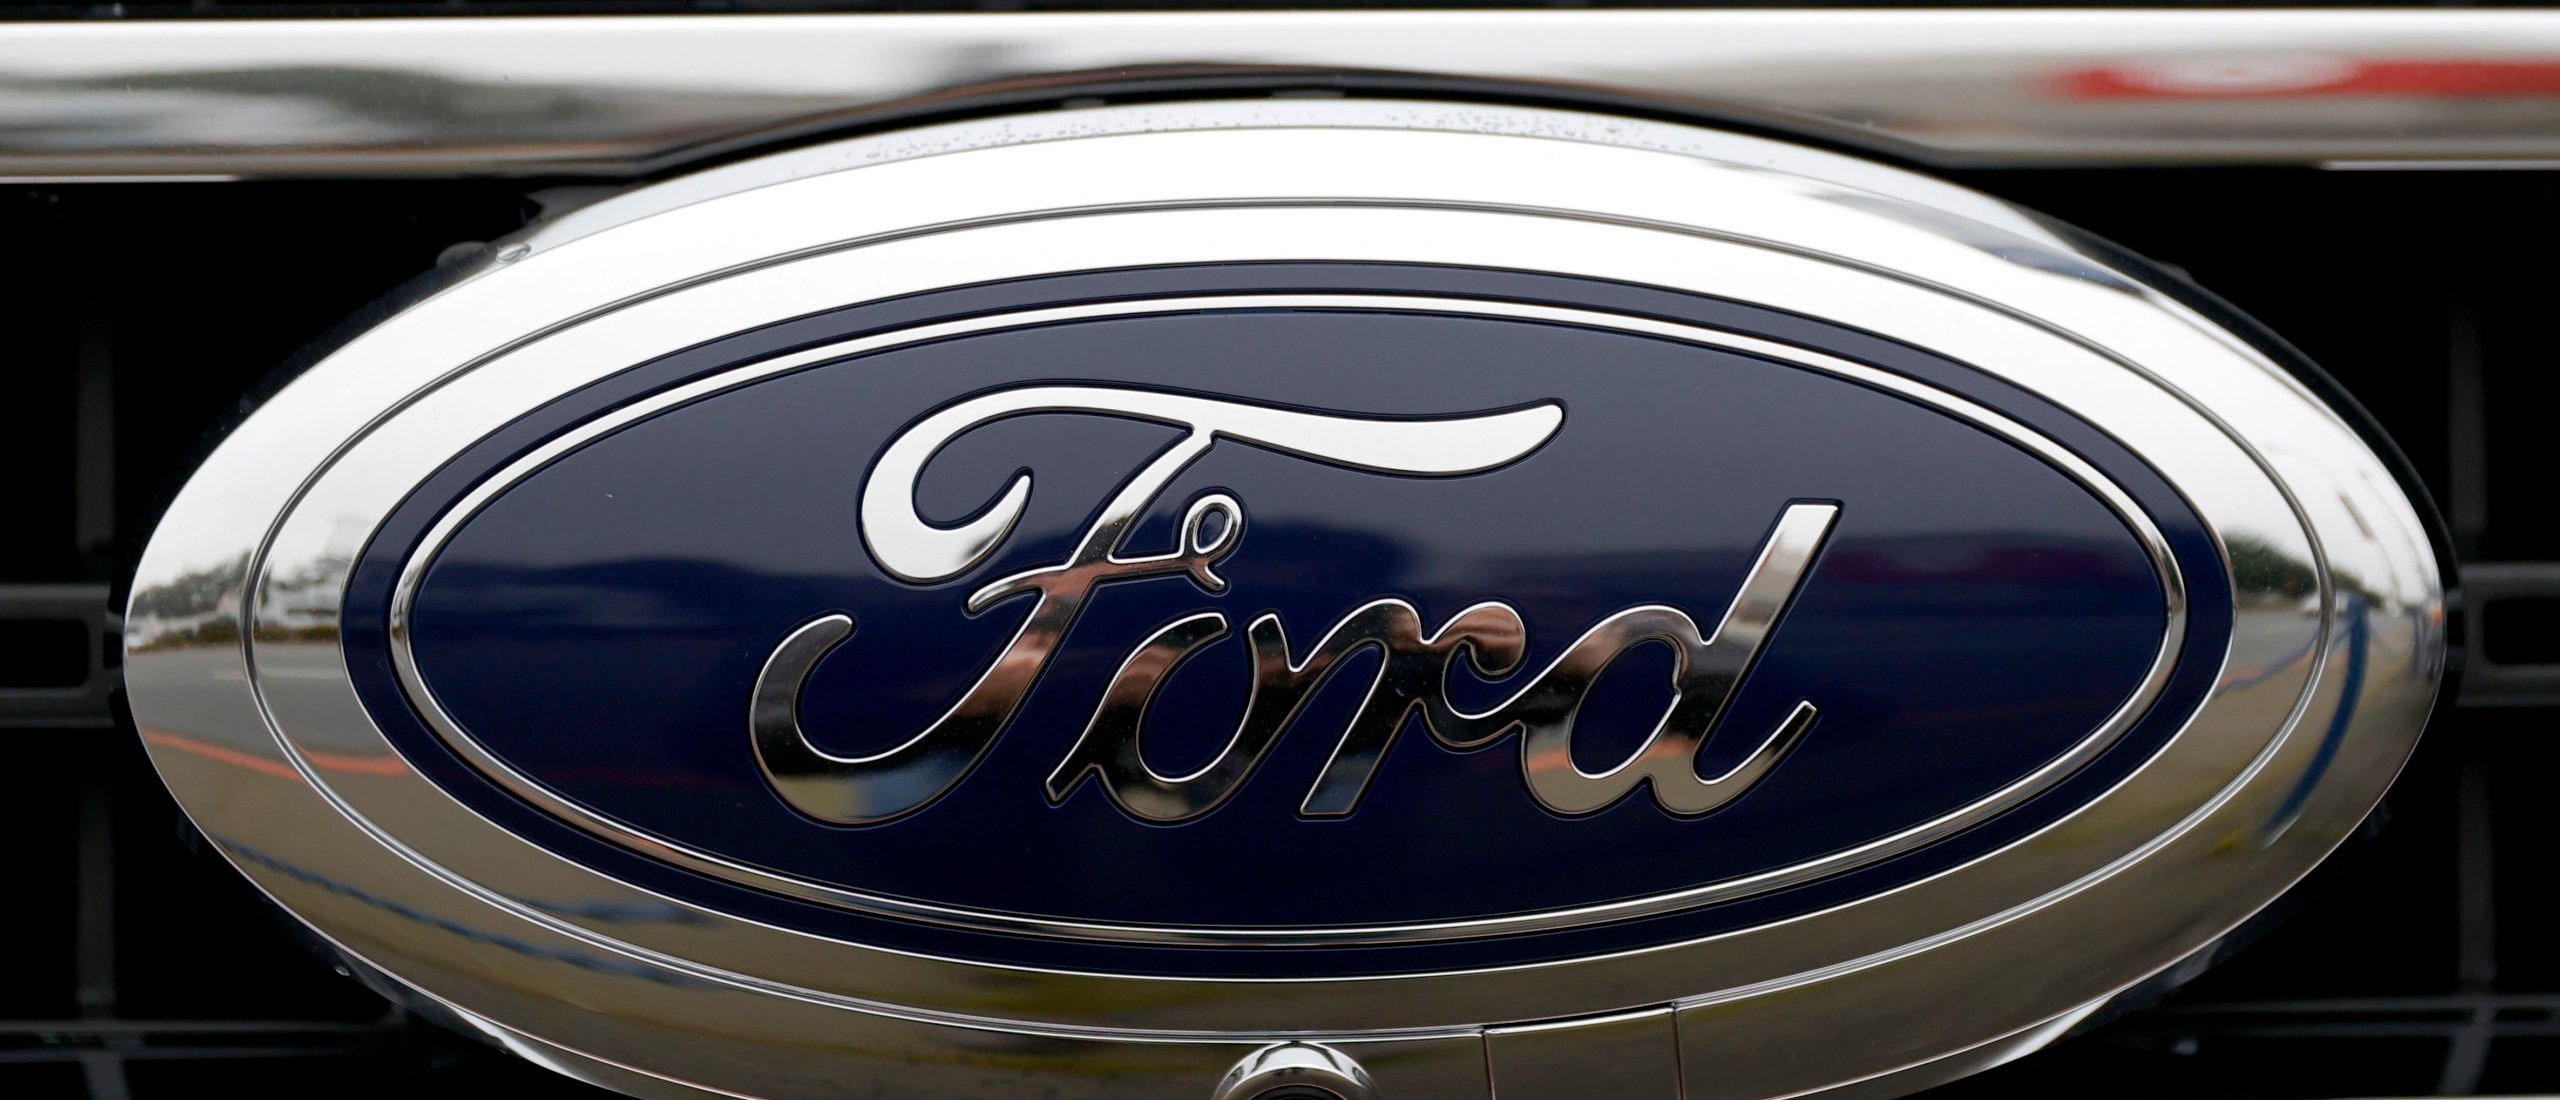 Profits Plummet And Vehicles Left Unfinished As Ford Struggles With Inflation